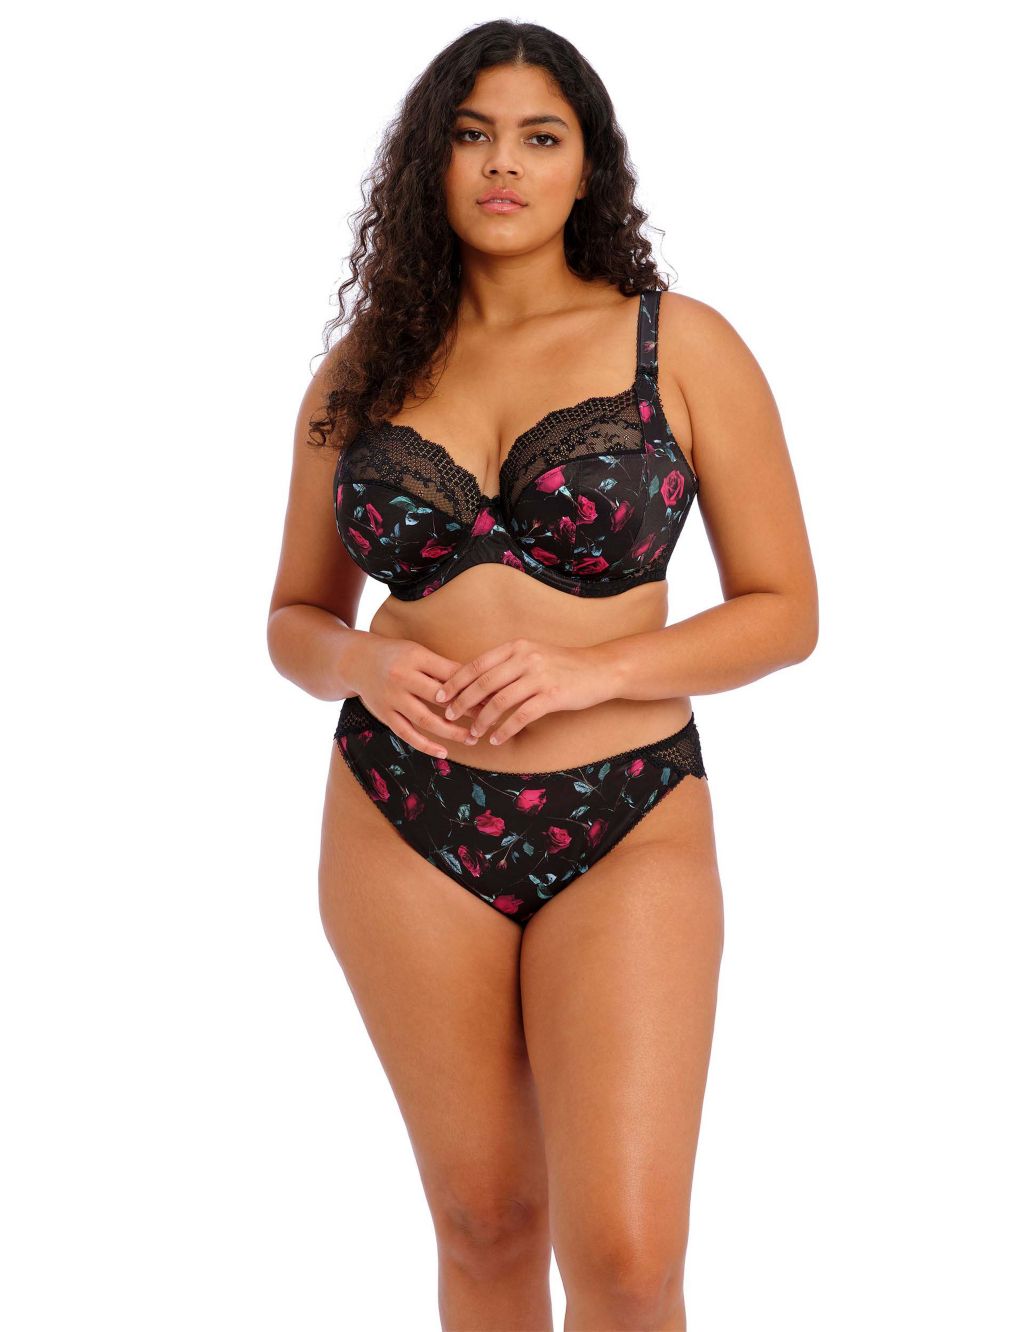 Lucie Floral Print Lace Wired Plunge Bra image 5